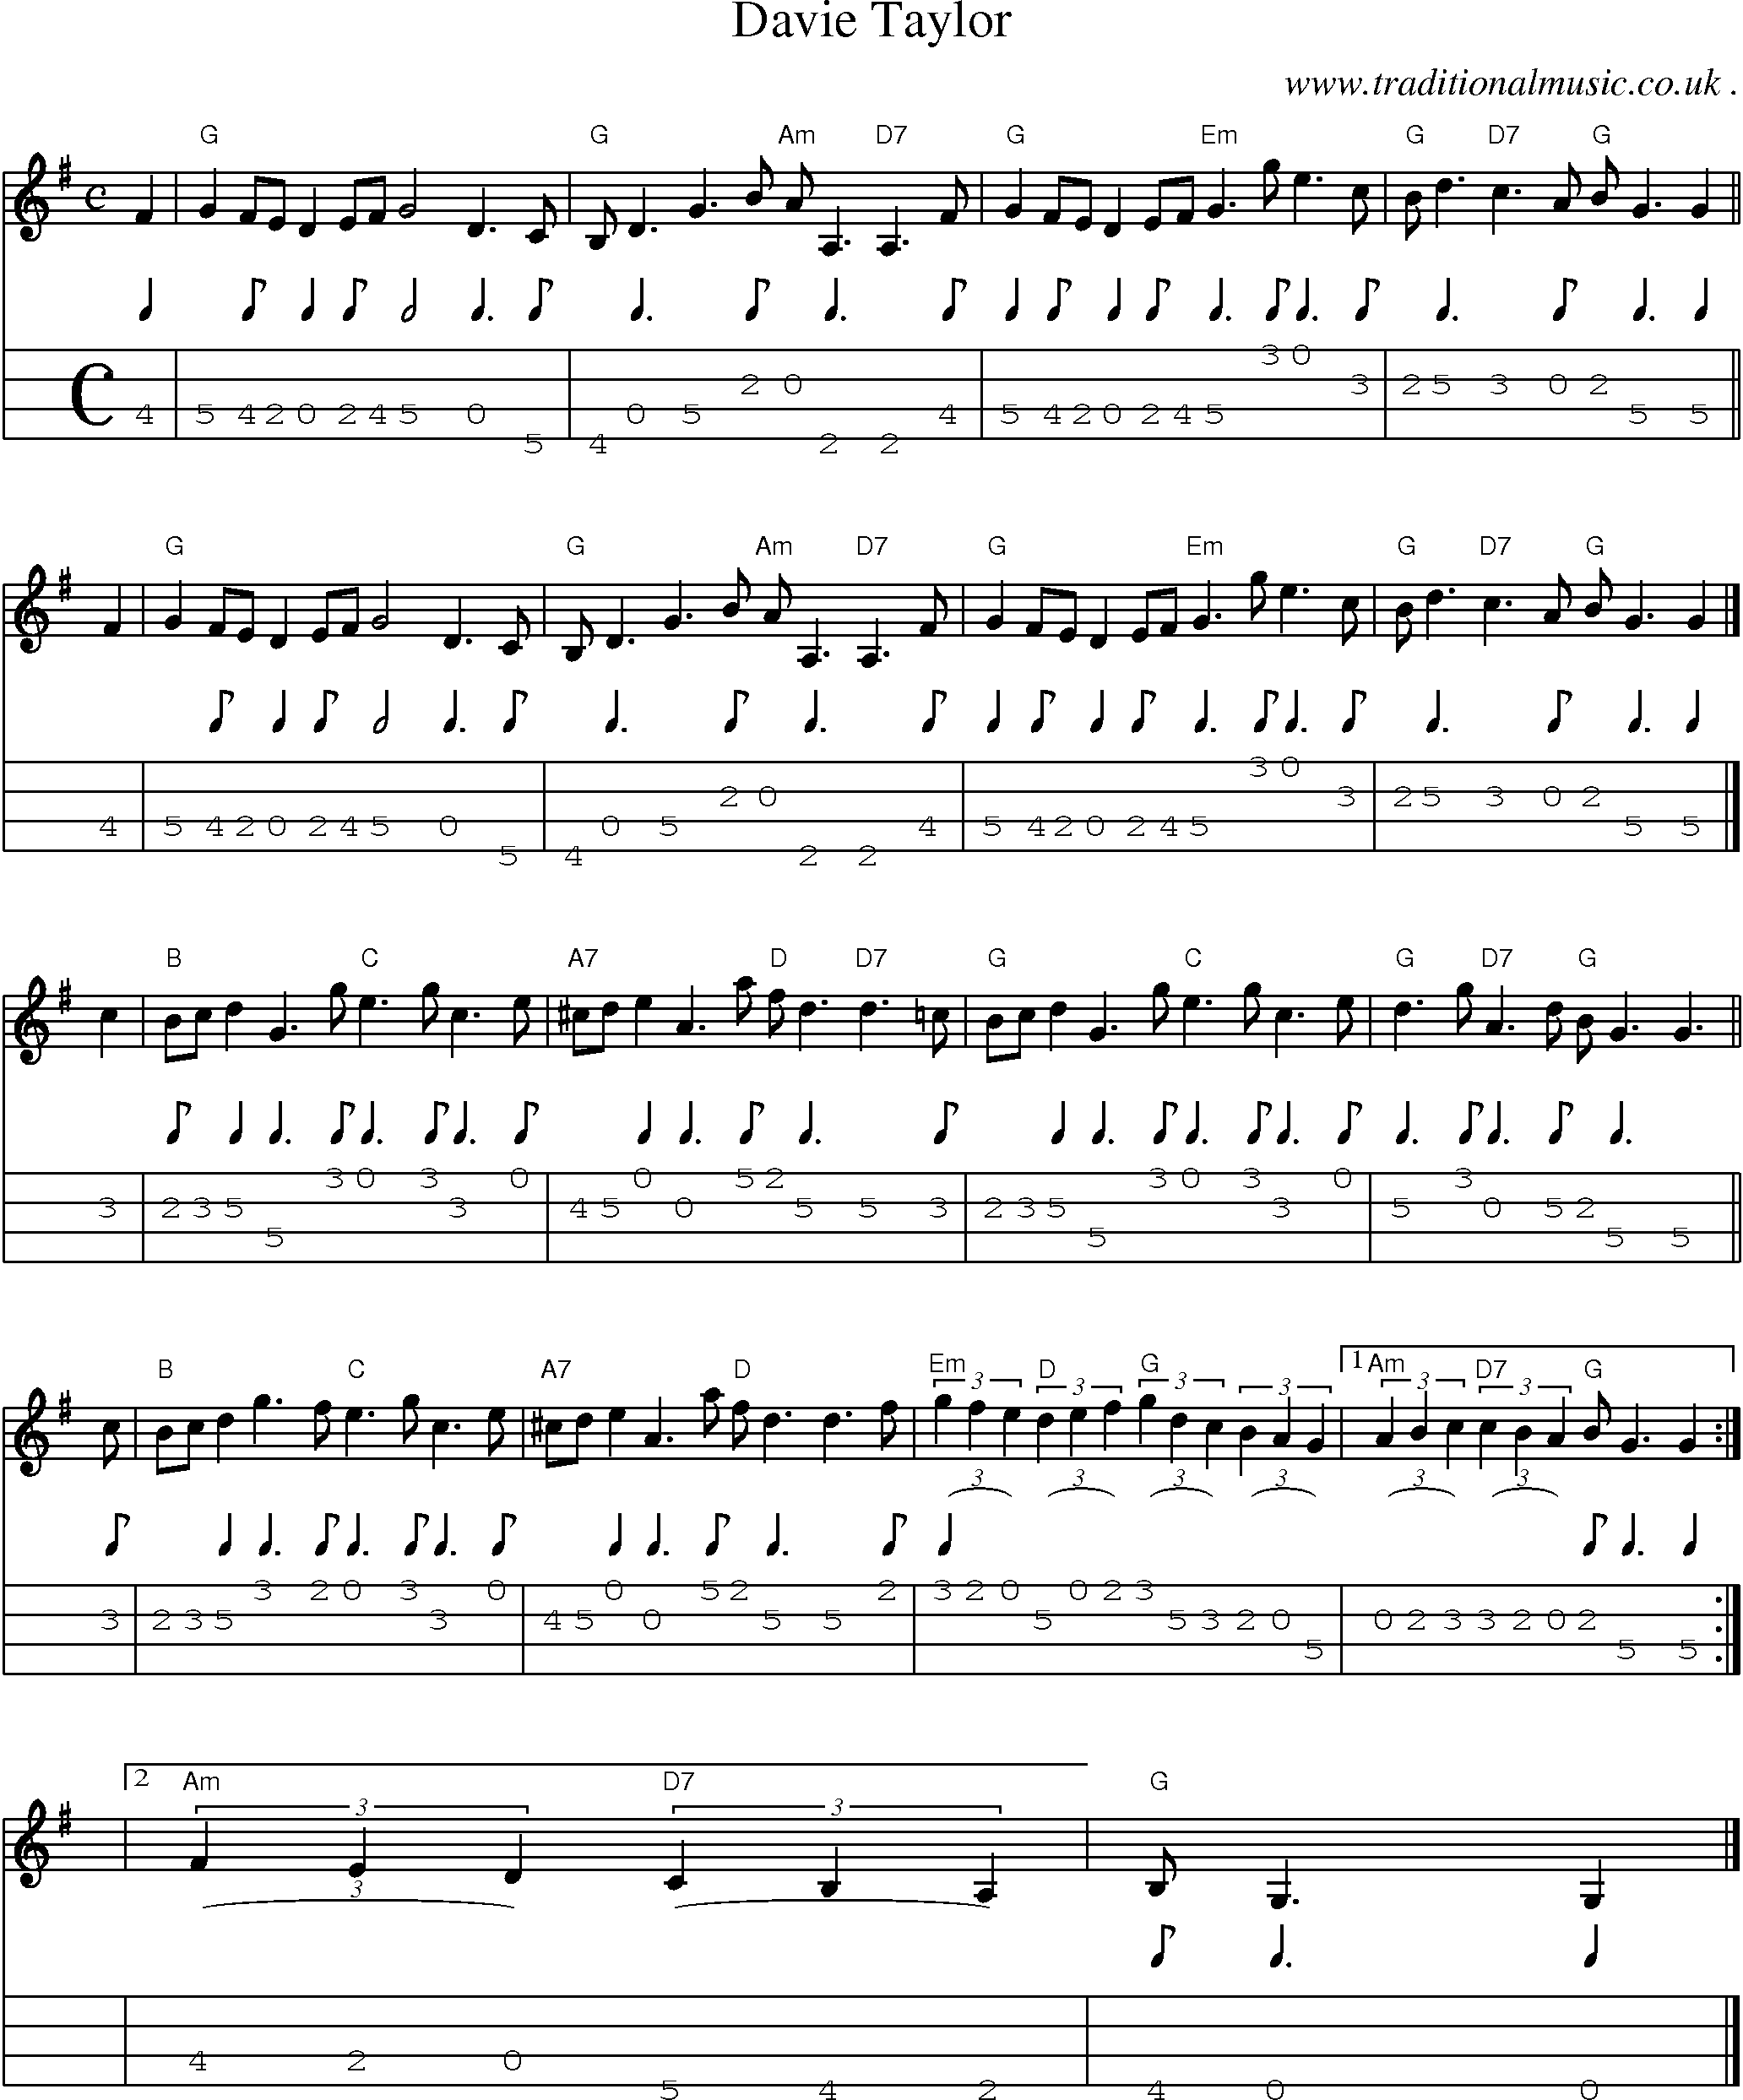 Sheet-music  score, Chords and Mandolin Tabs for Davie Taylor